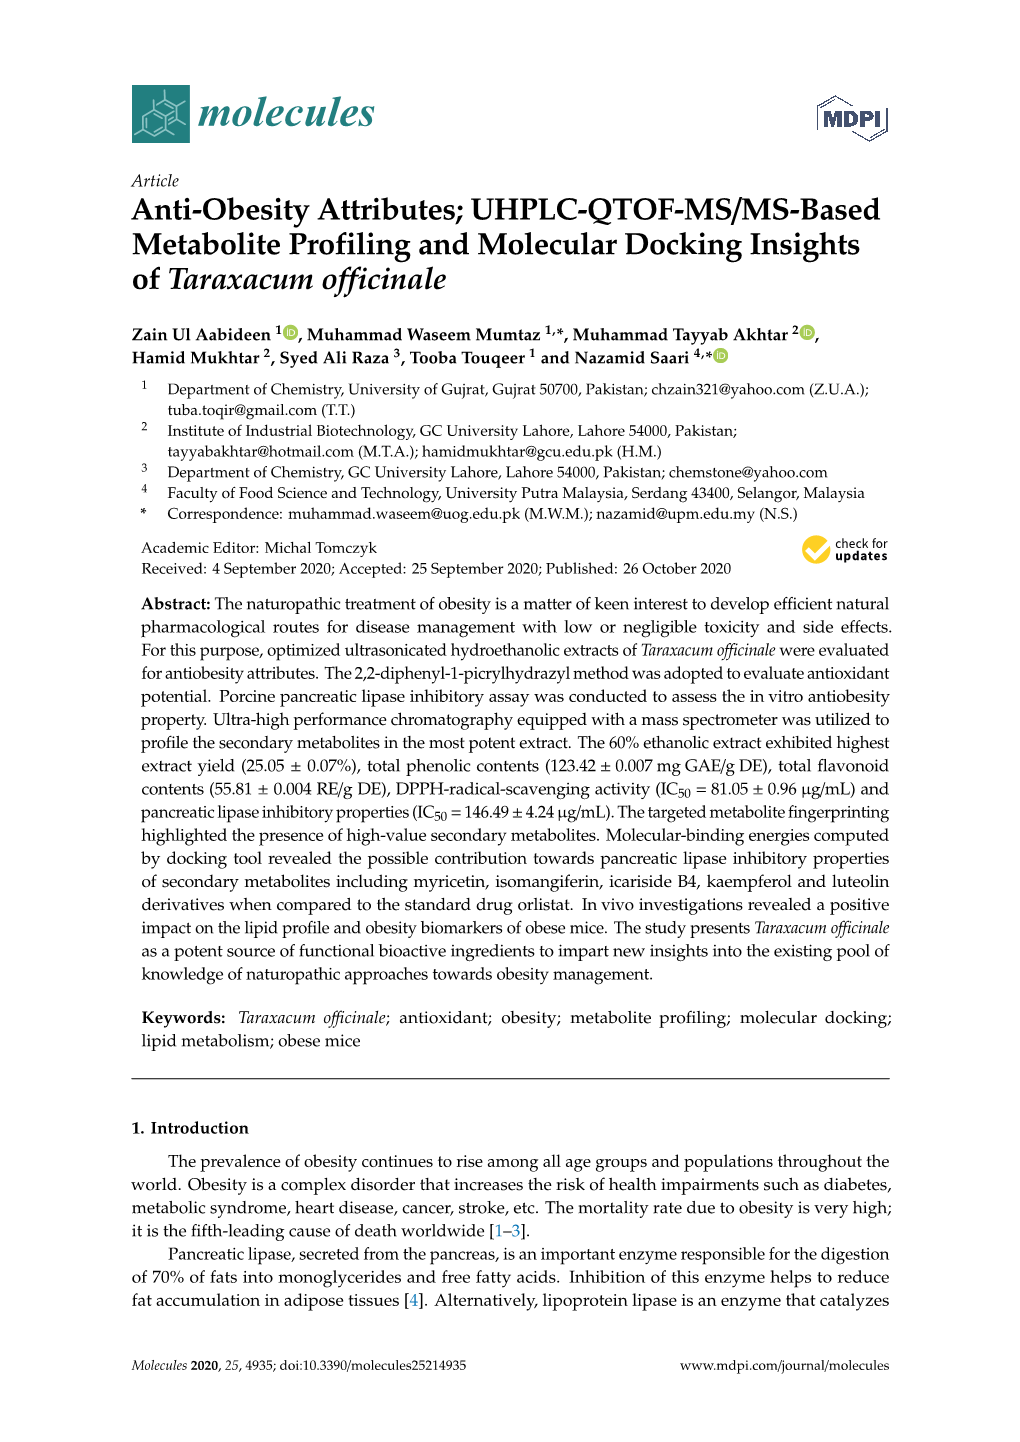 Anti-Obesity Attributes; UHPLC-QTOF-MS/MS-Based Metabolite Profiling and Molecular Docking Insights of Taraxacum Officinale